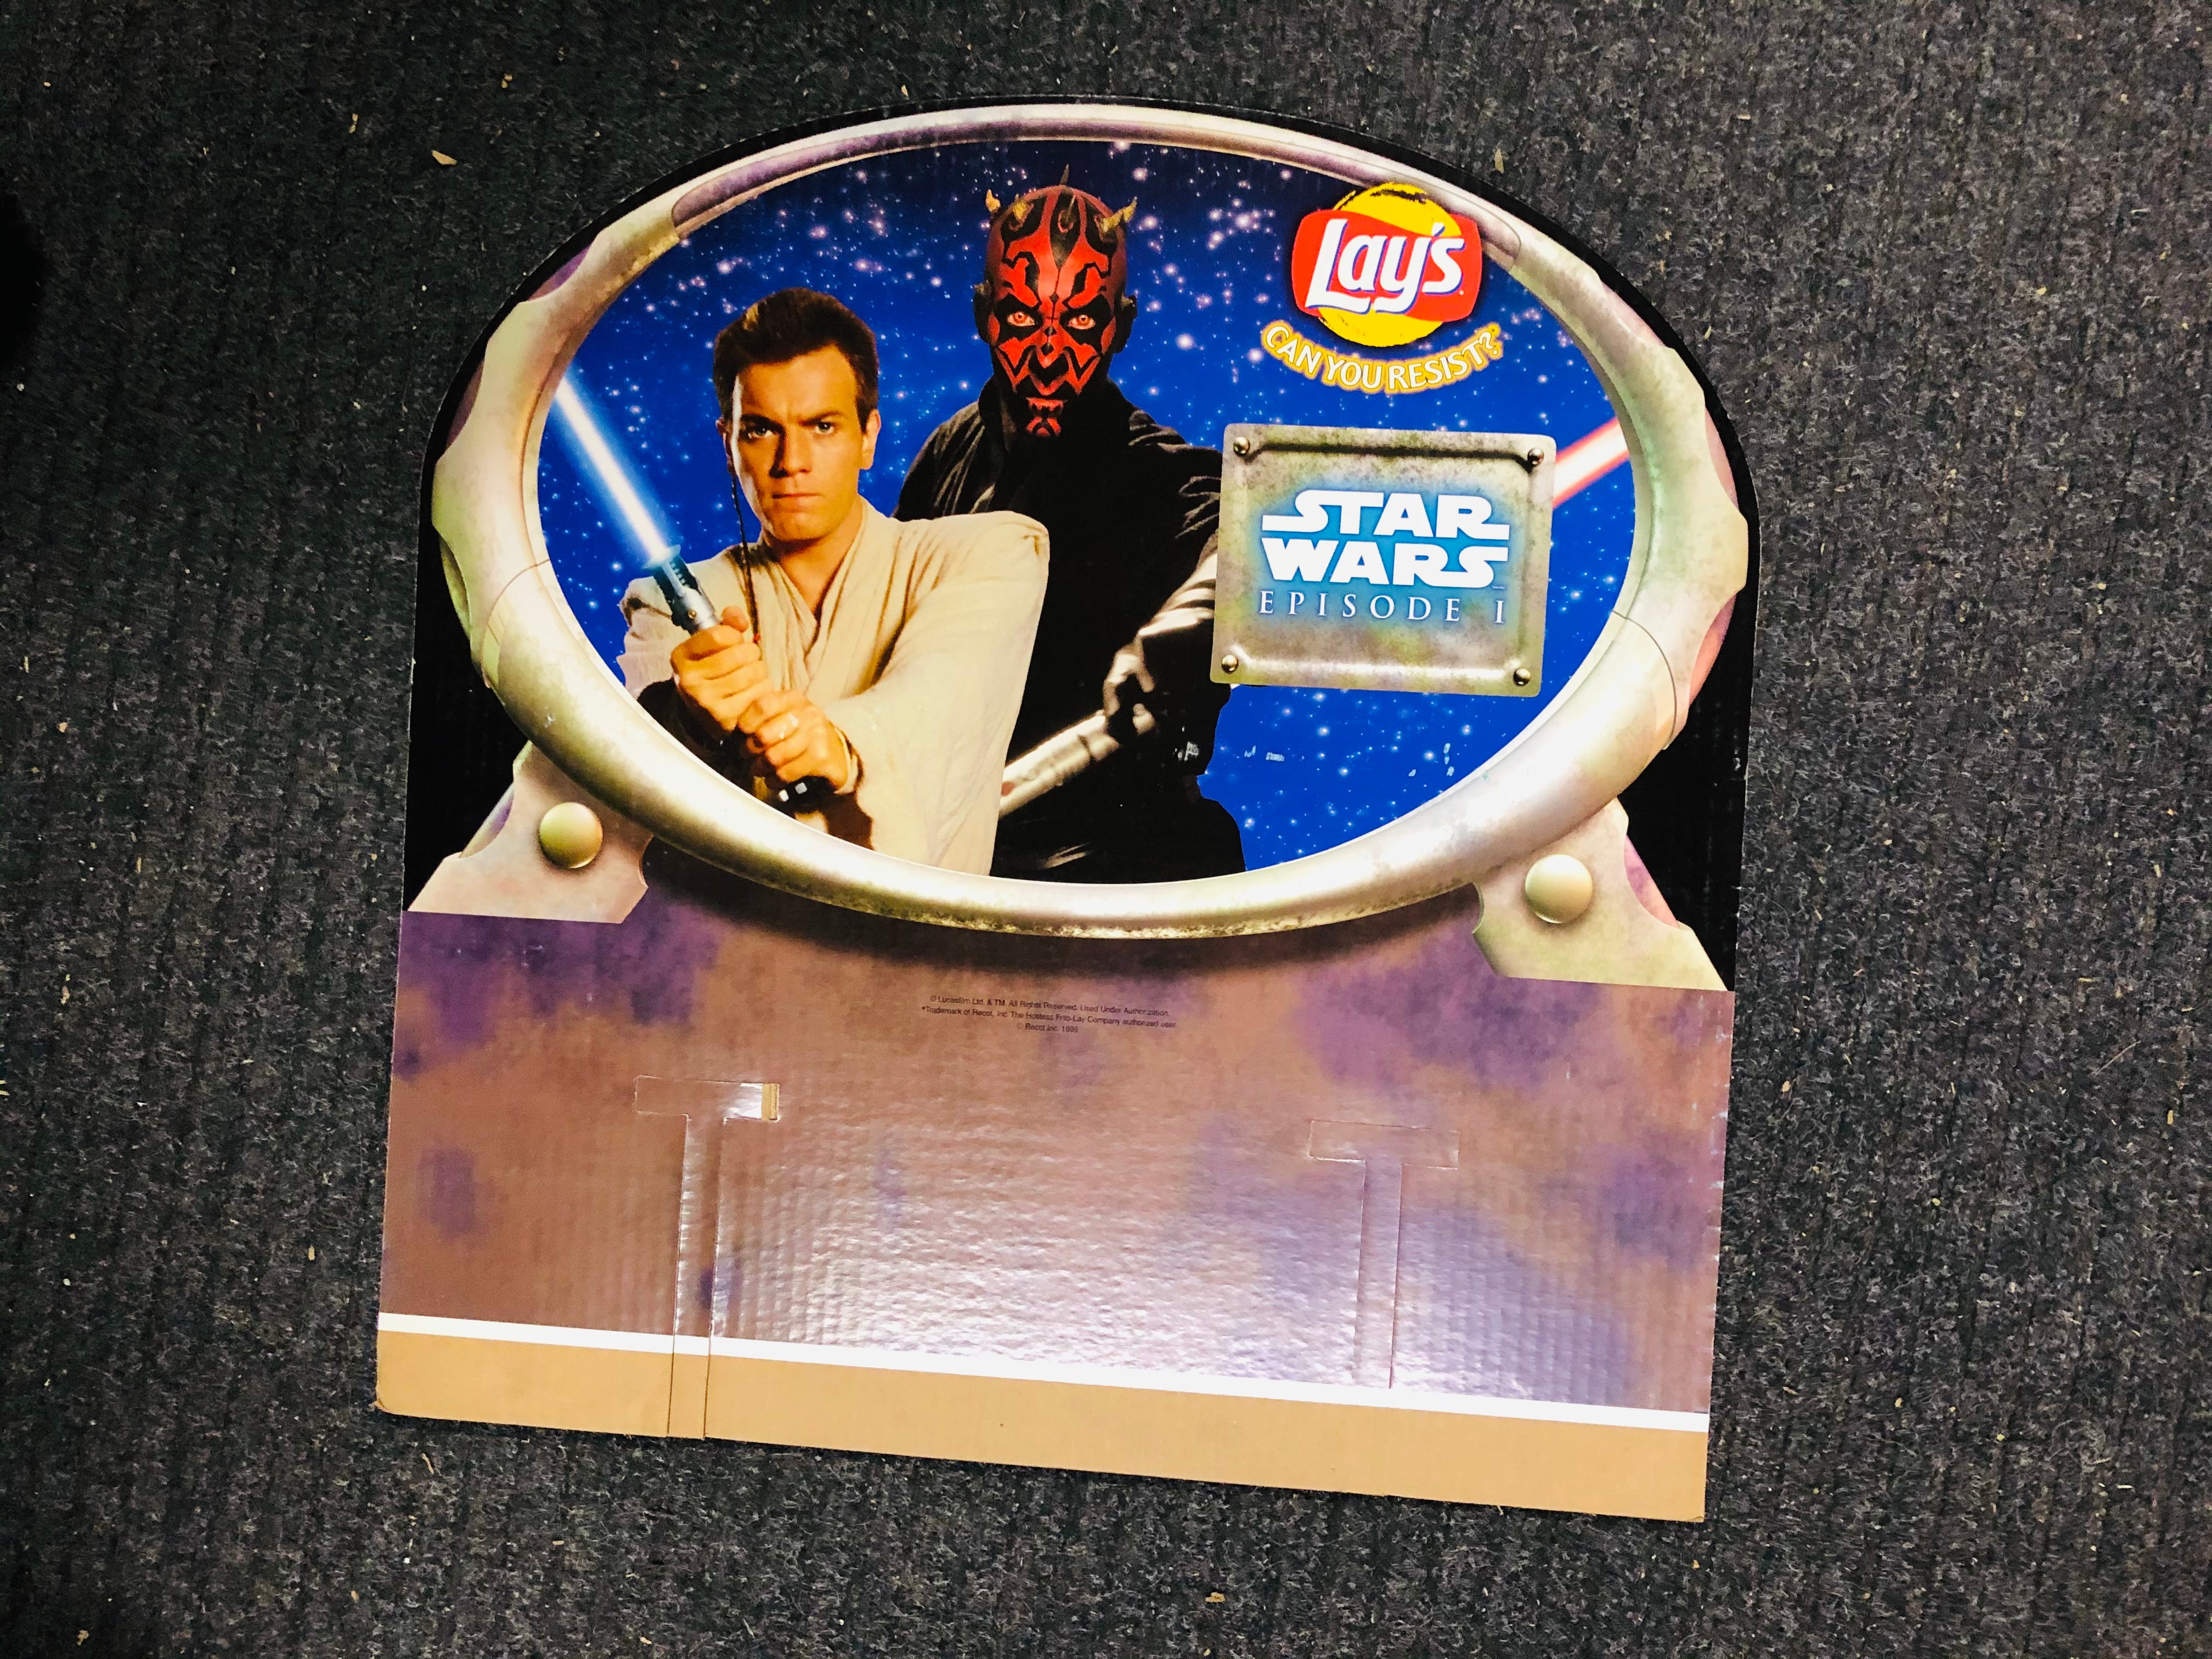 Star Wars Episode 1 rare Lays chips cardboard ad sign 18x19